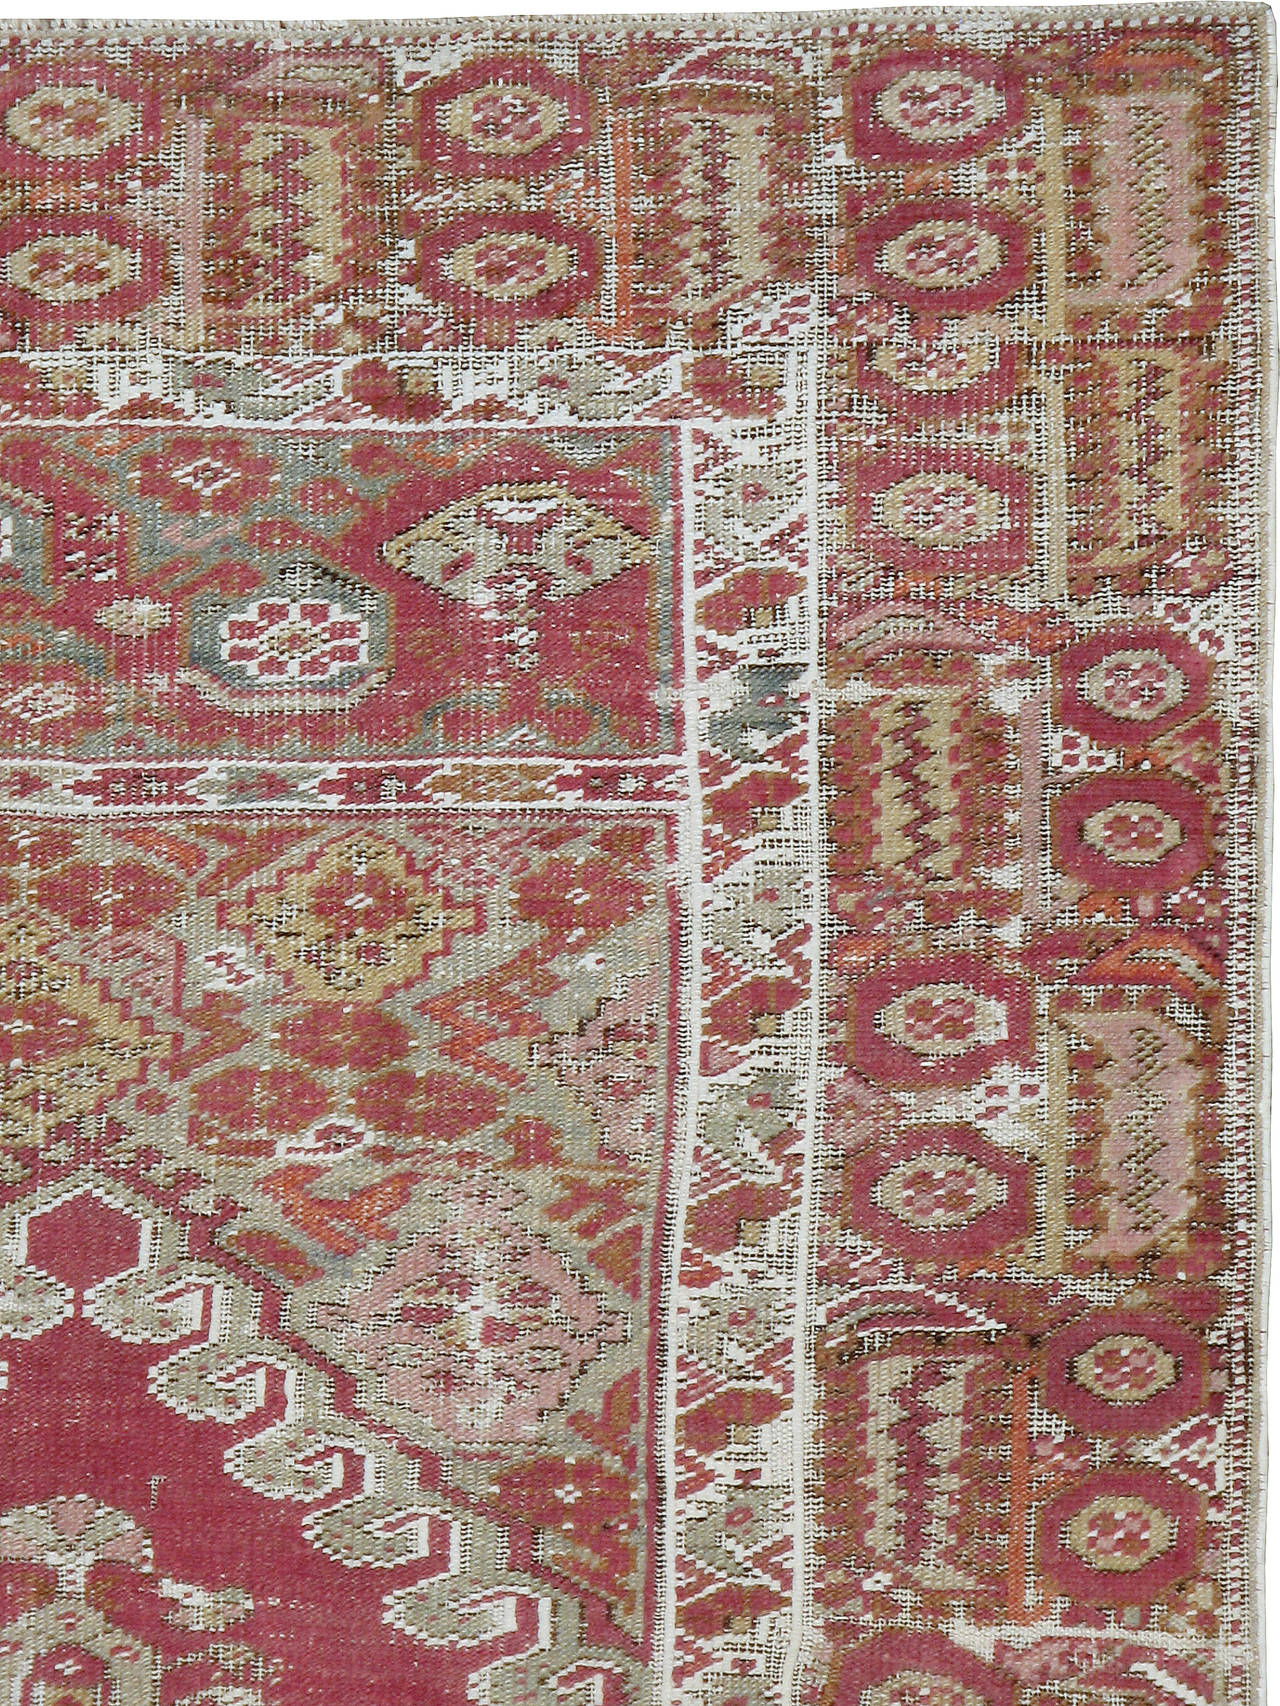 An early 20th century Turkish Ghourdes carpet. This antique Ghourdes rug offers a fire brick central field of leafy palmettes and flowers, encased by a geometric border.